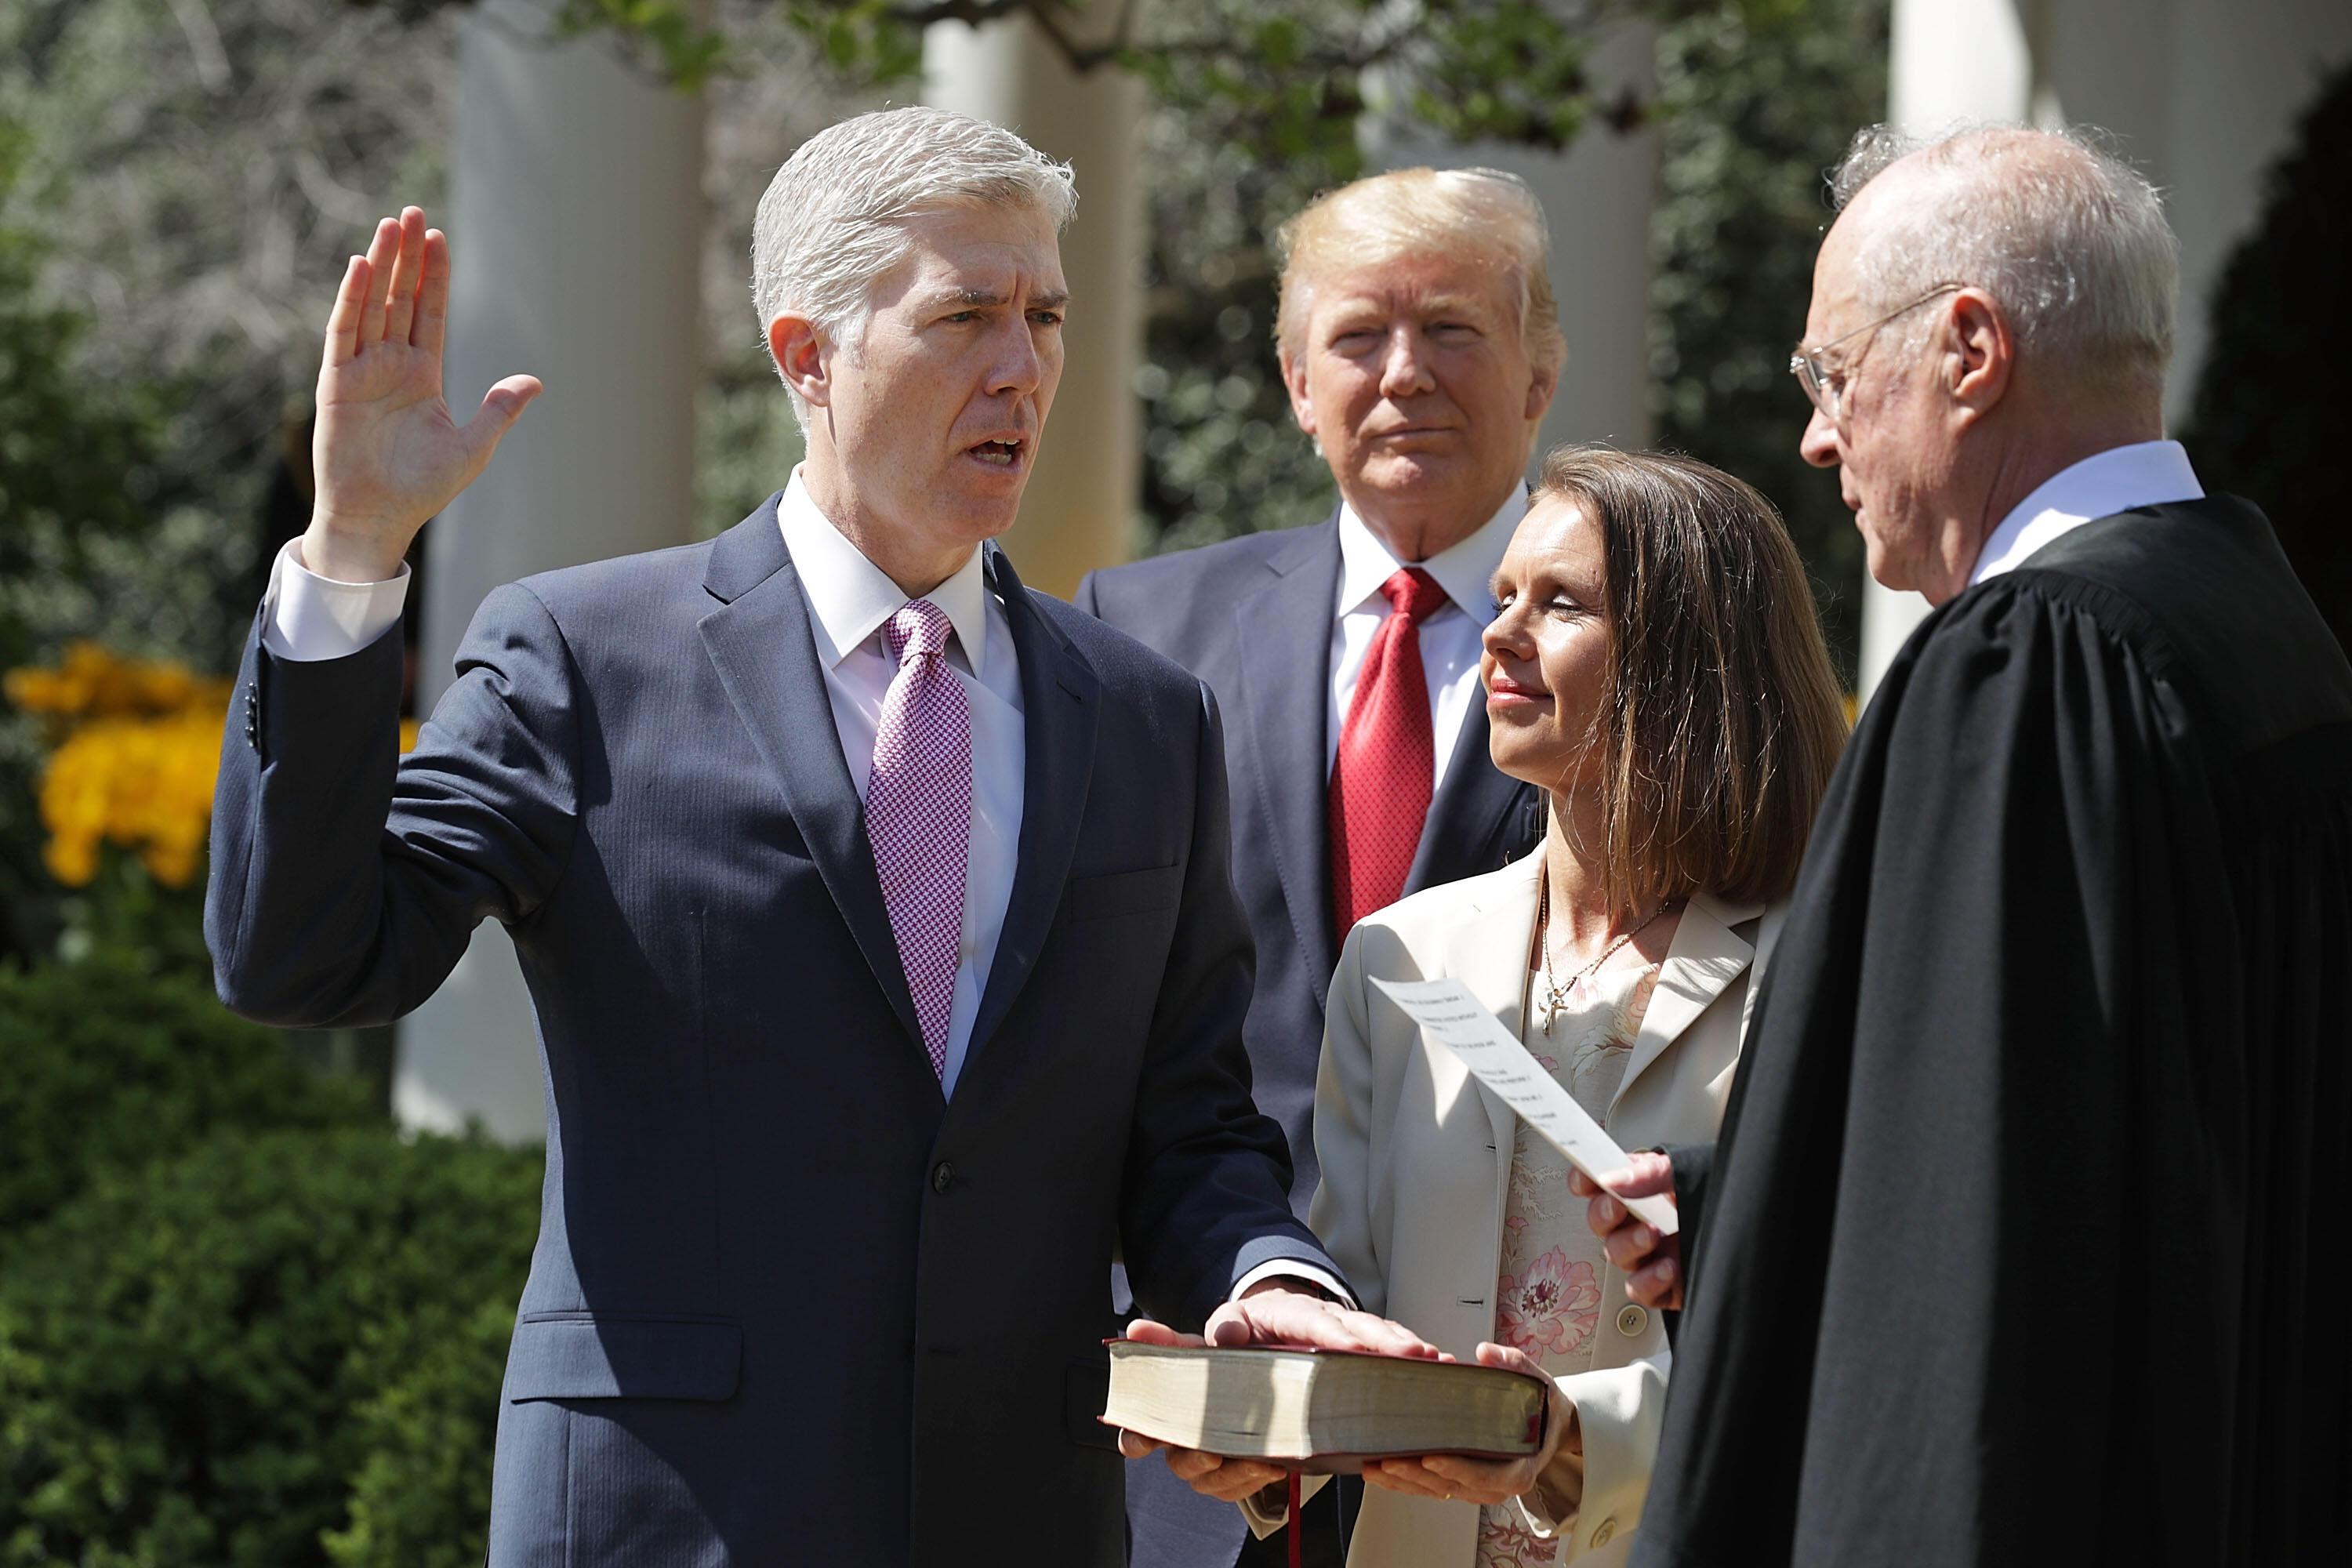 WASHINGTON, DC - APRIL 10:  U.S. Supreme Court Associate Justice Anthony Kennedy (R) administers the judicial oath to Judge Neil Gorsuch (L) as his wife Marie Louise Gorshuch holds a bible and President Donald Trump looks on during a ceremony in the Rose 